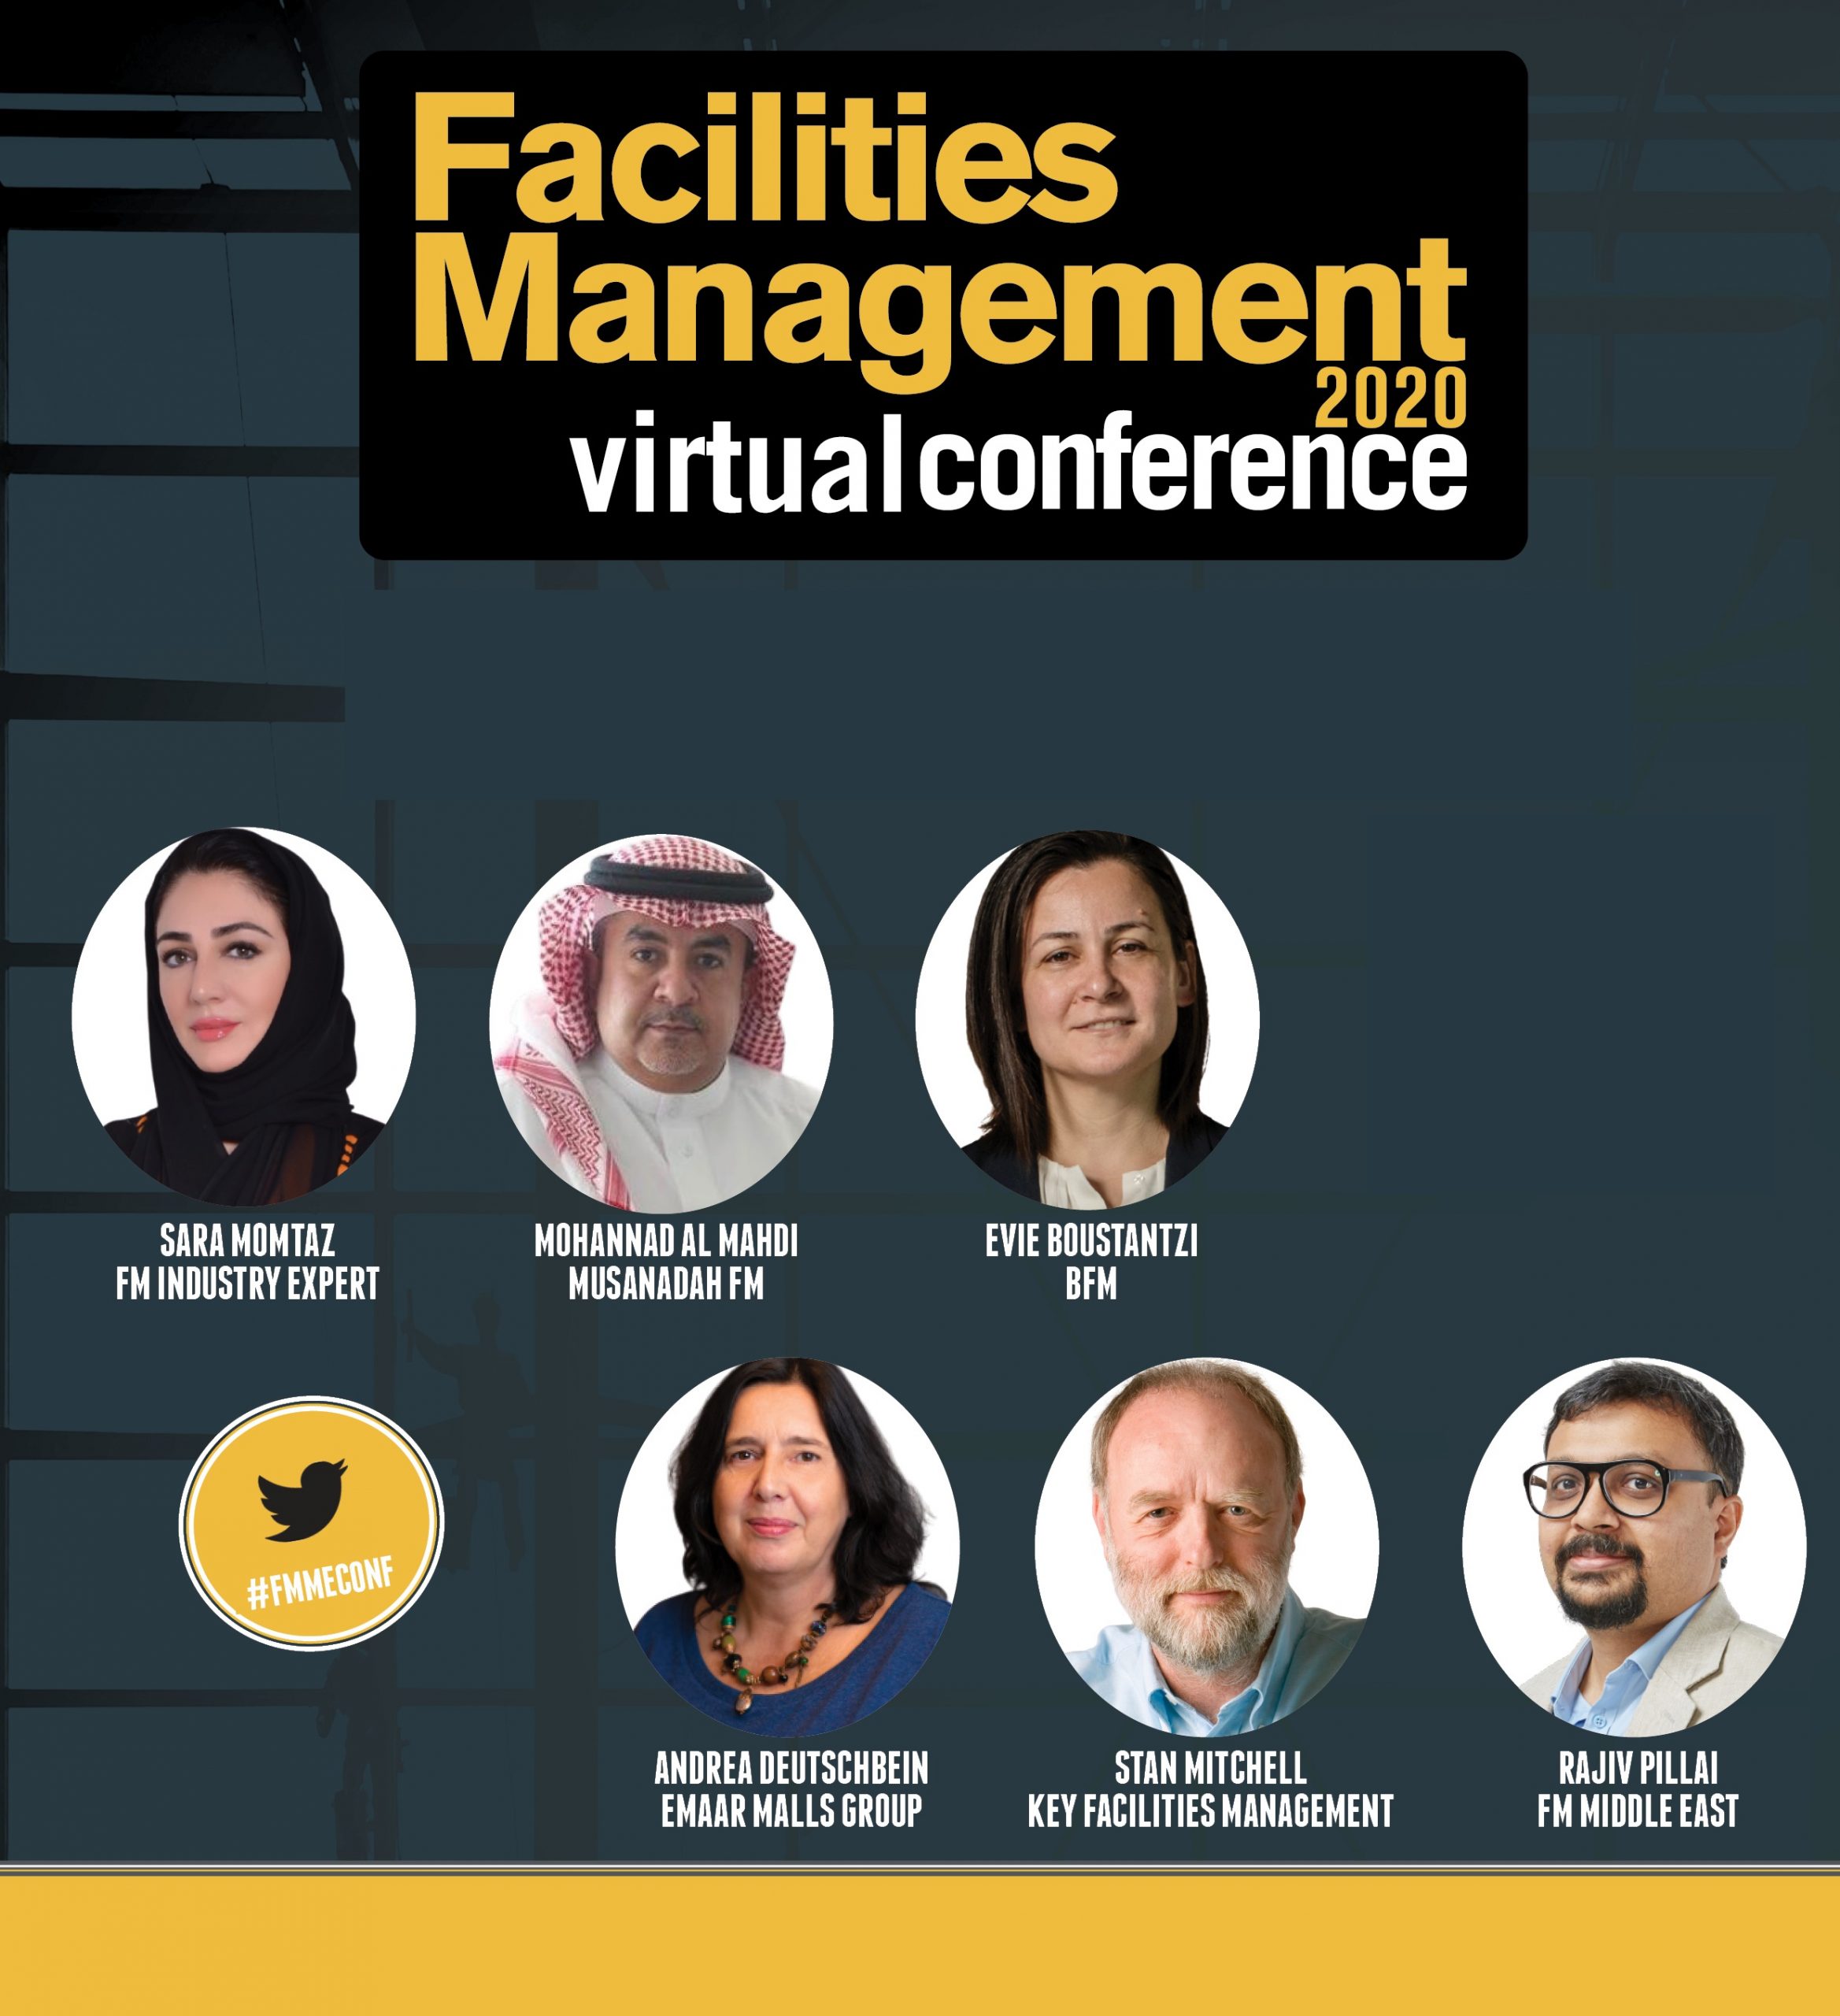 Full Video Facilities Management Virtual Conference 2020 Facilities